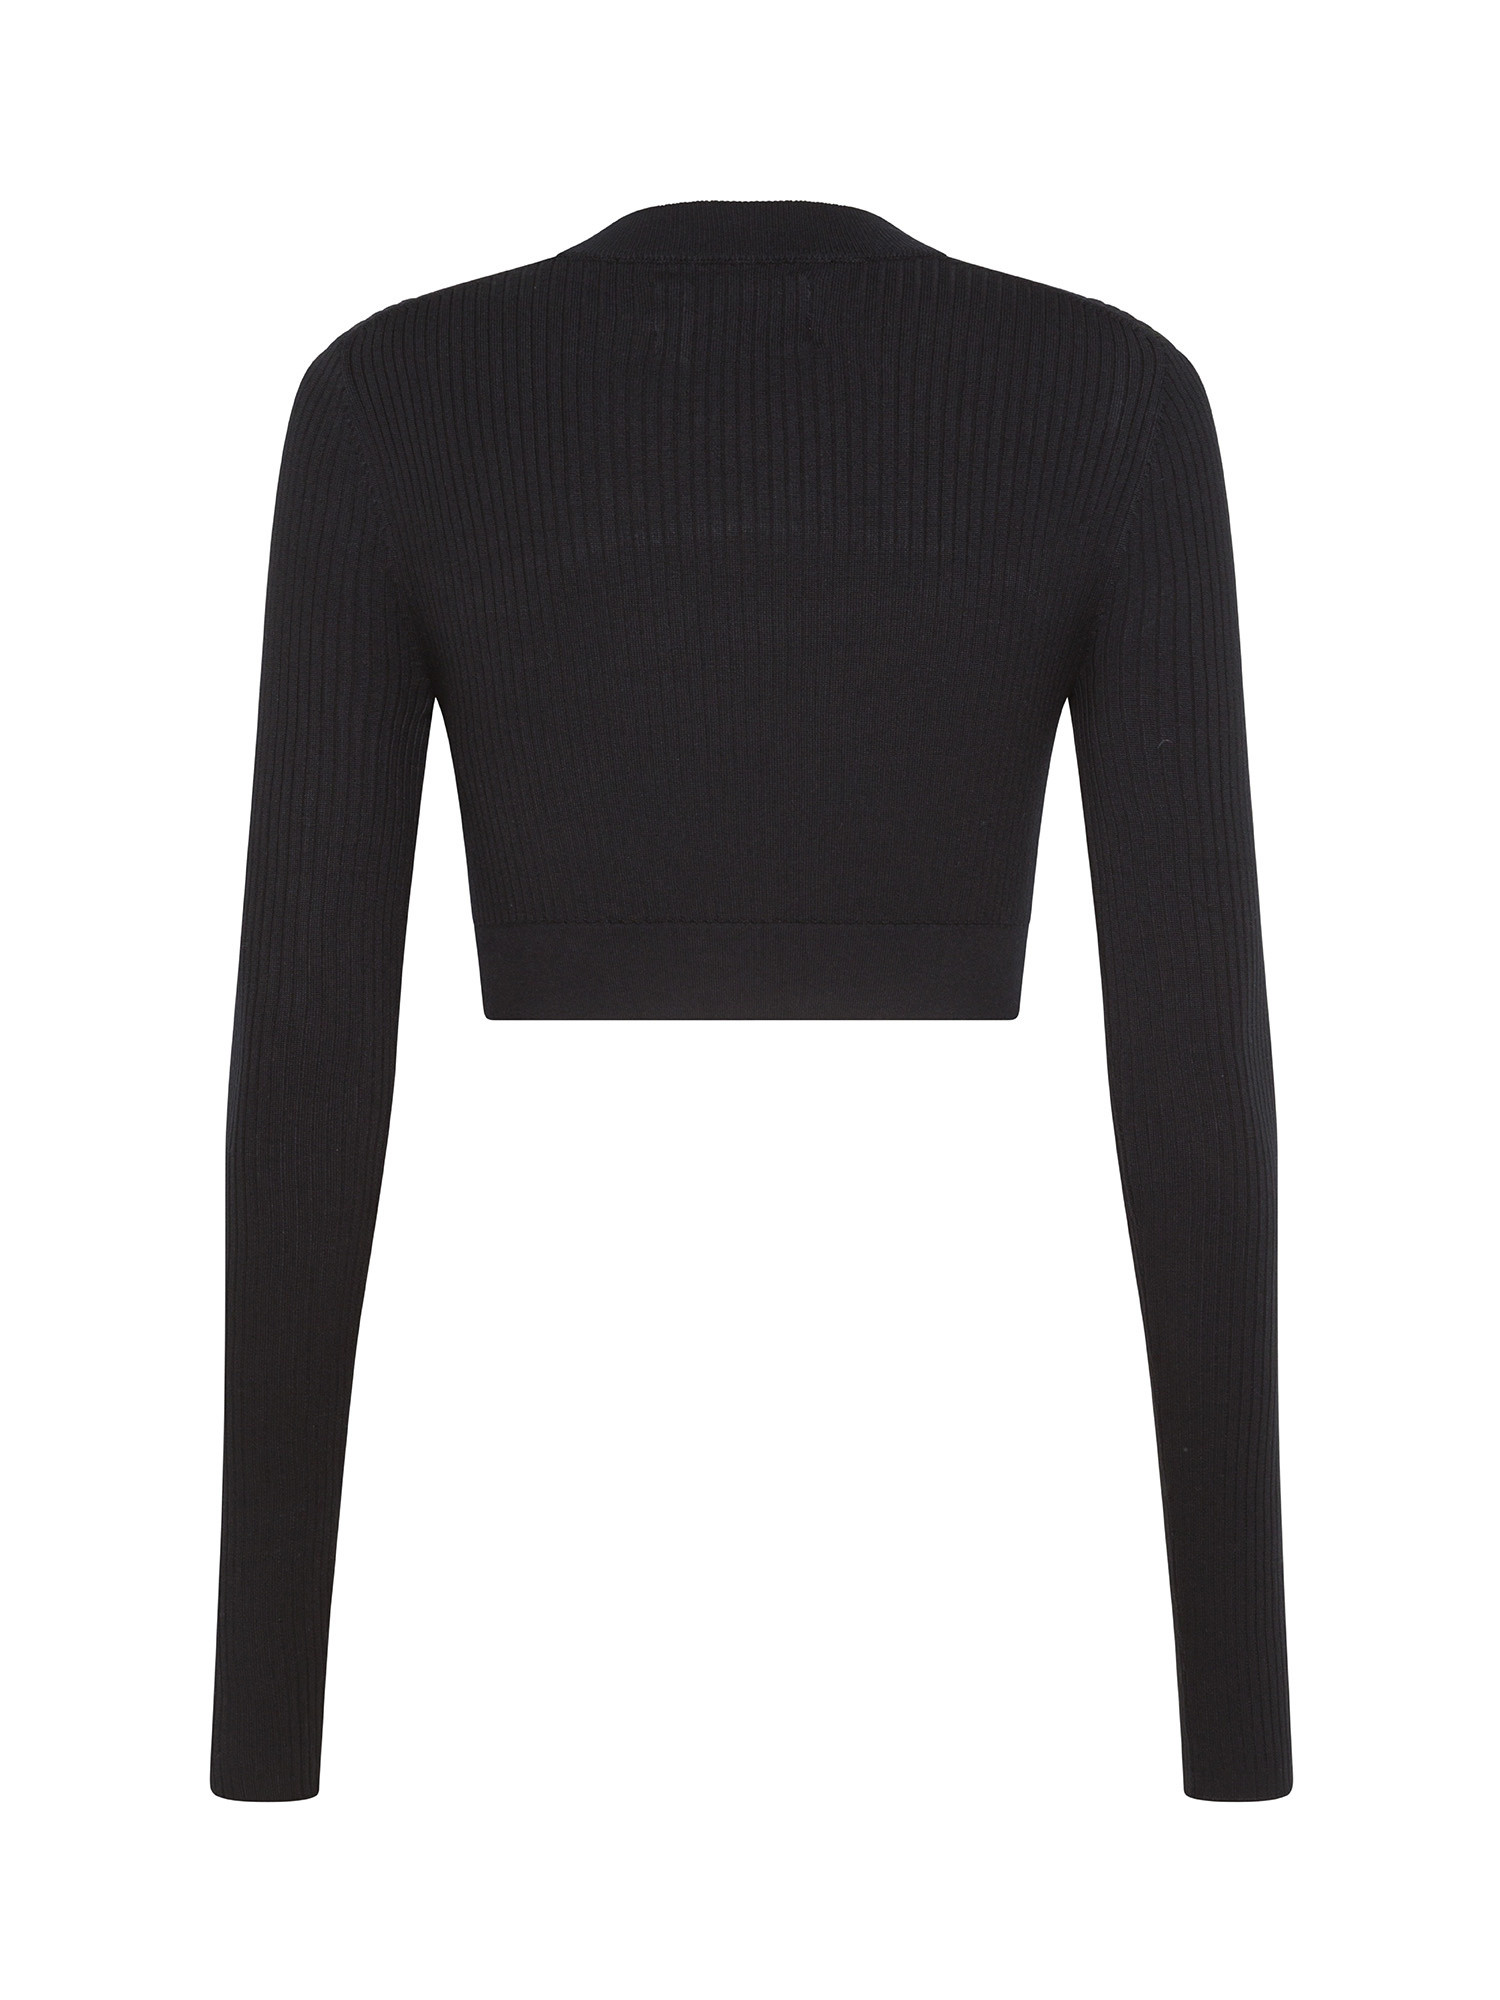 Calvin Klein Jeans - Crop sweater with cut out effect, Black, large image number 1